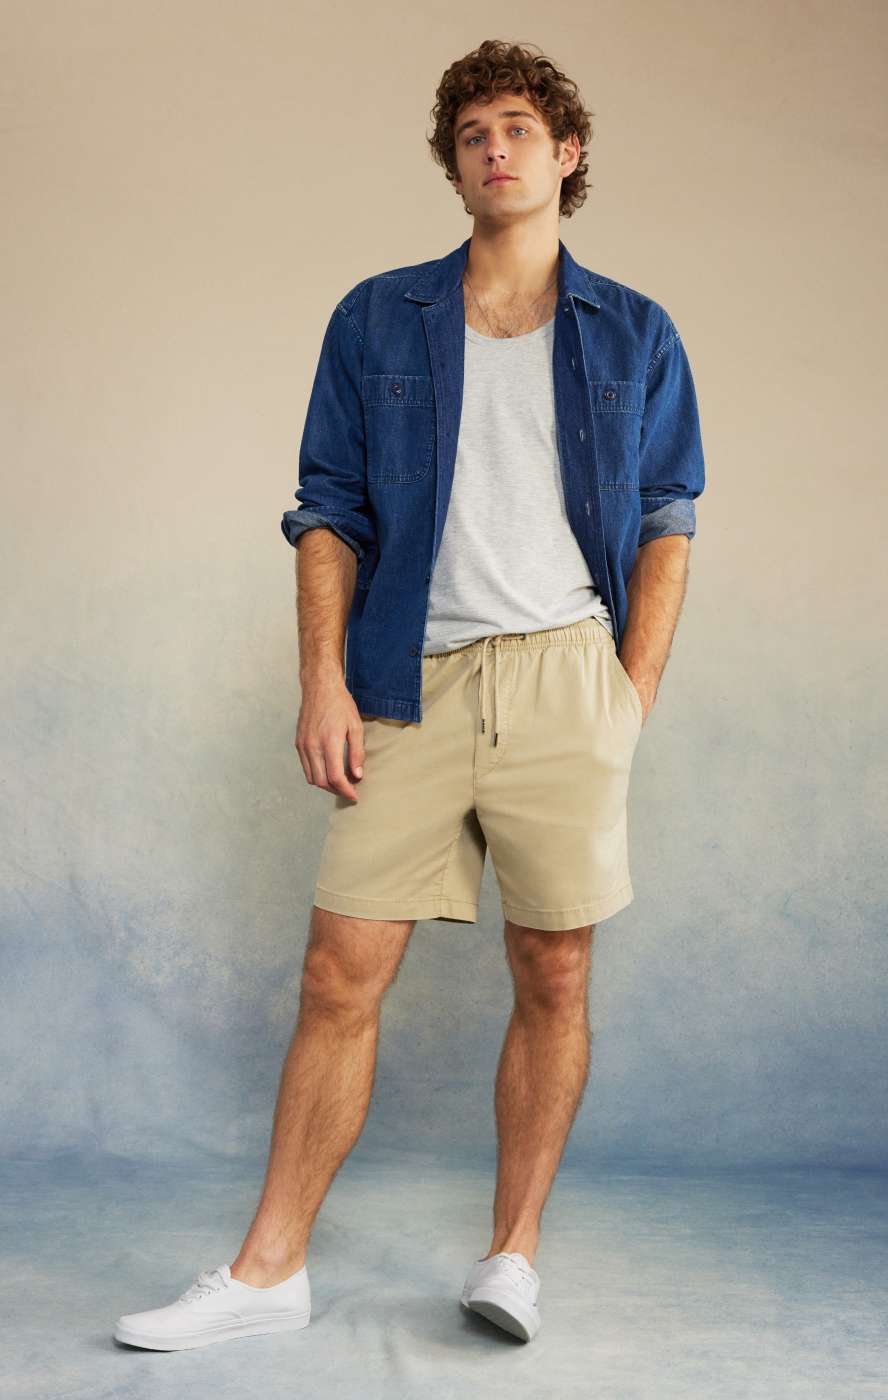 Model in tan shorts with white shirt and blue button up